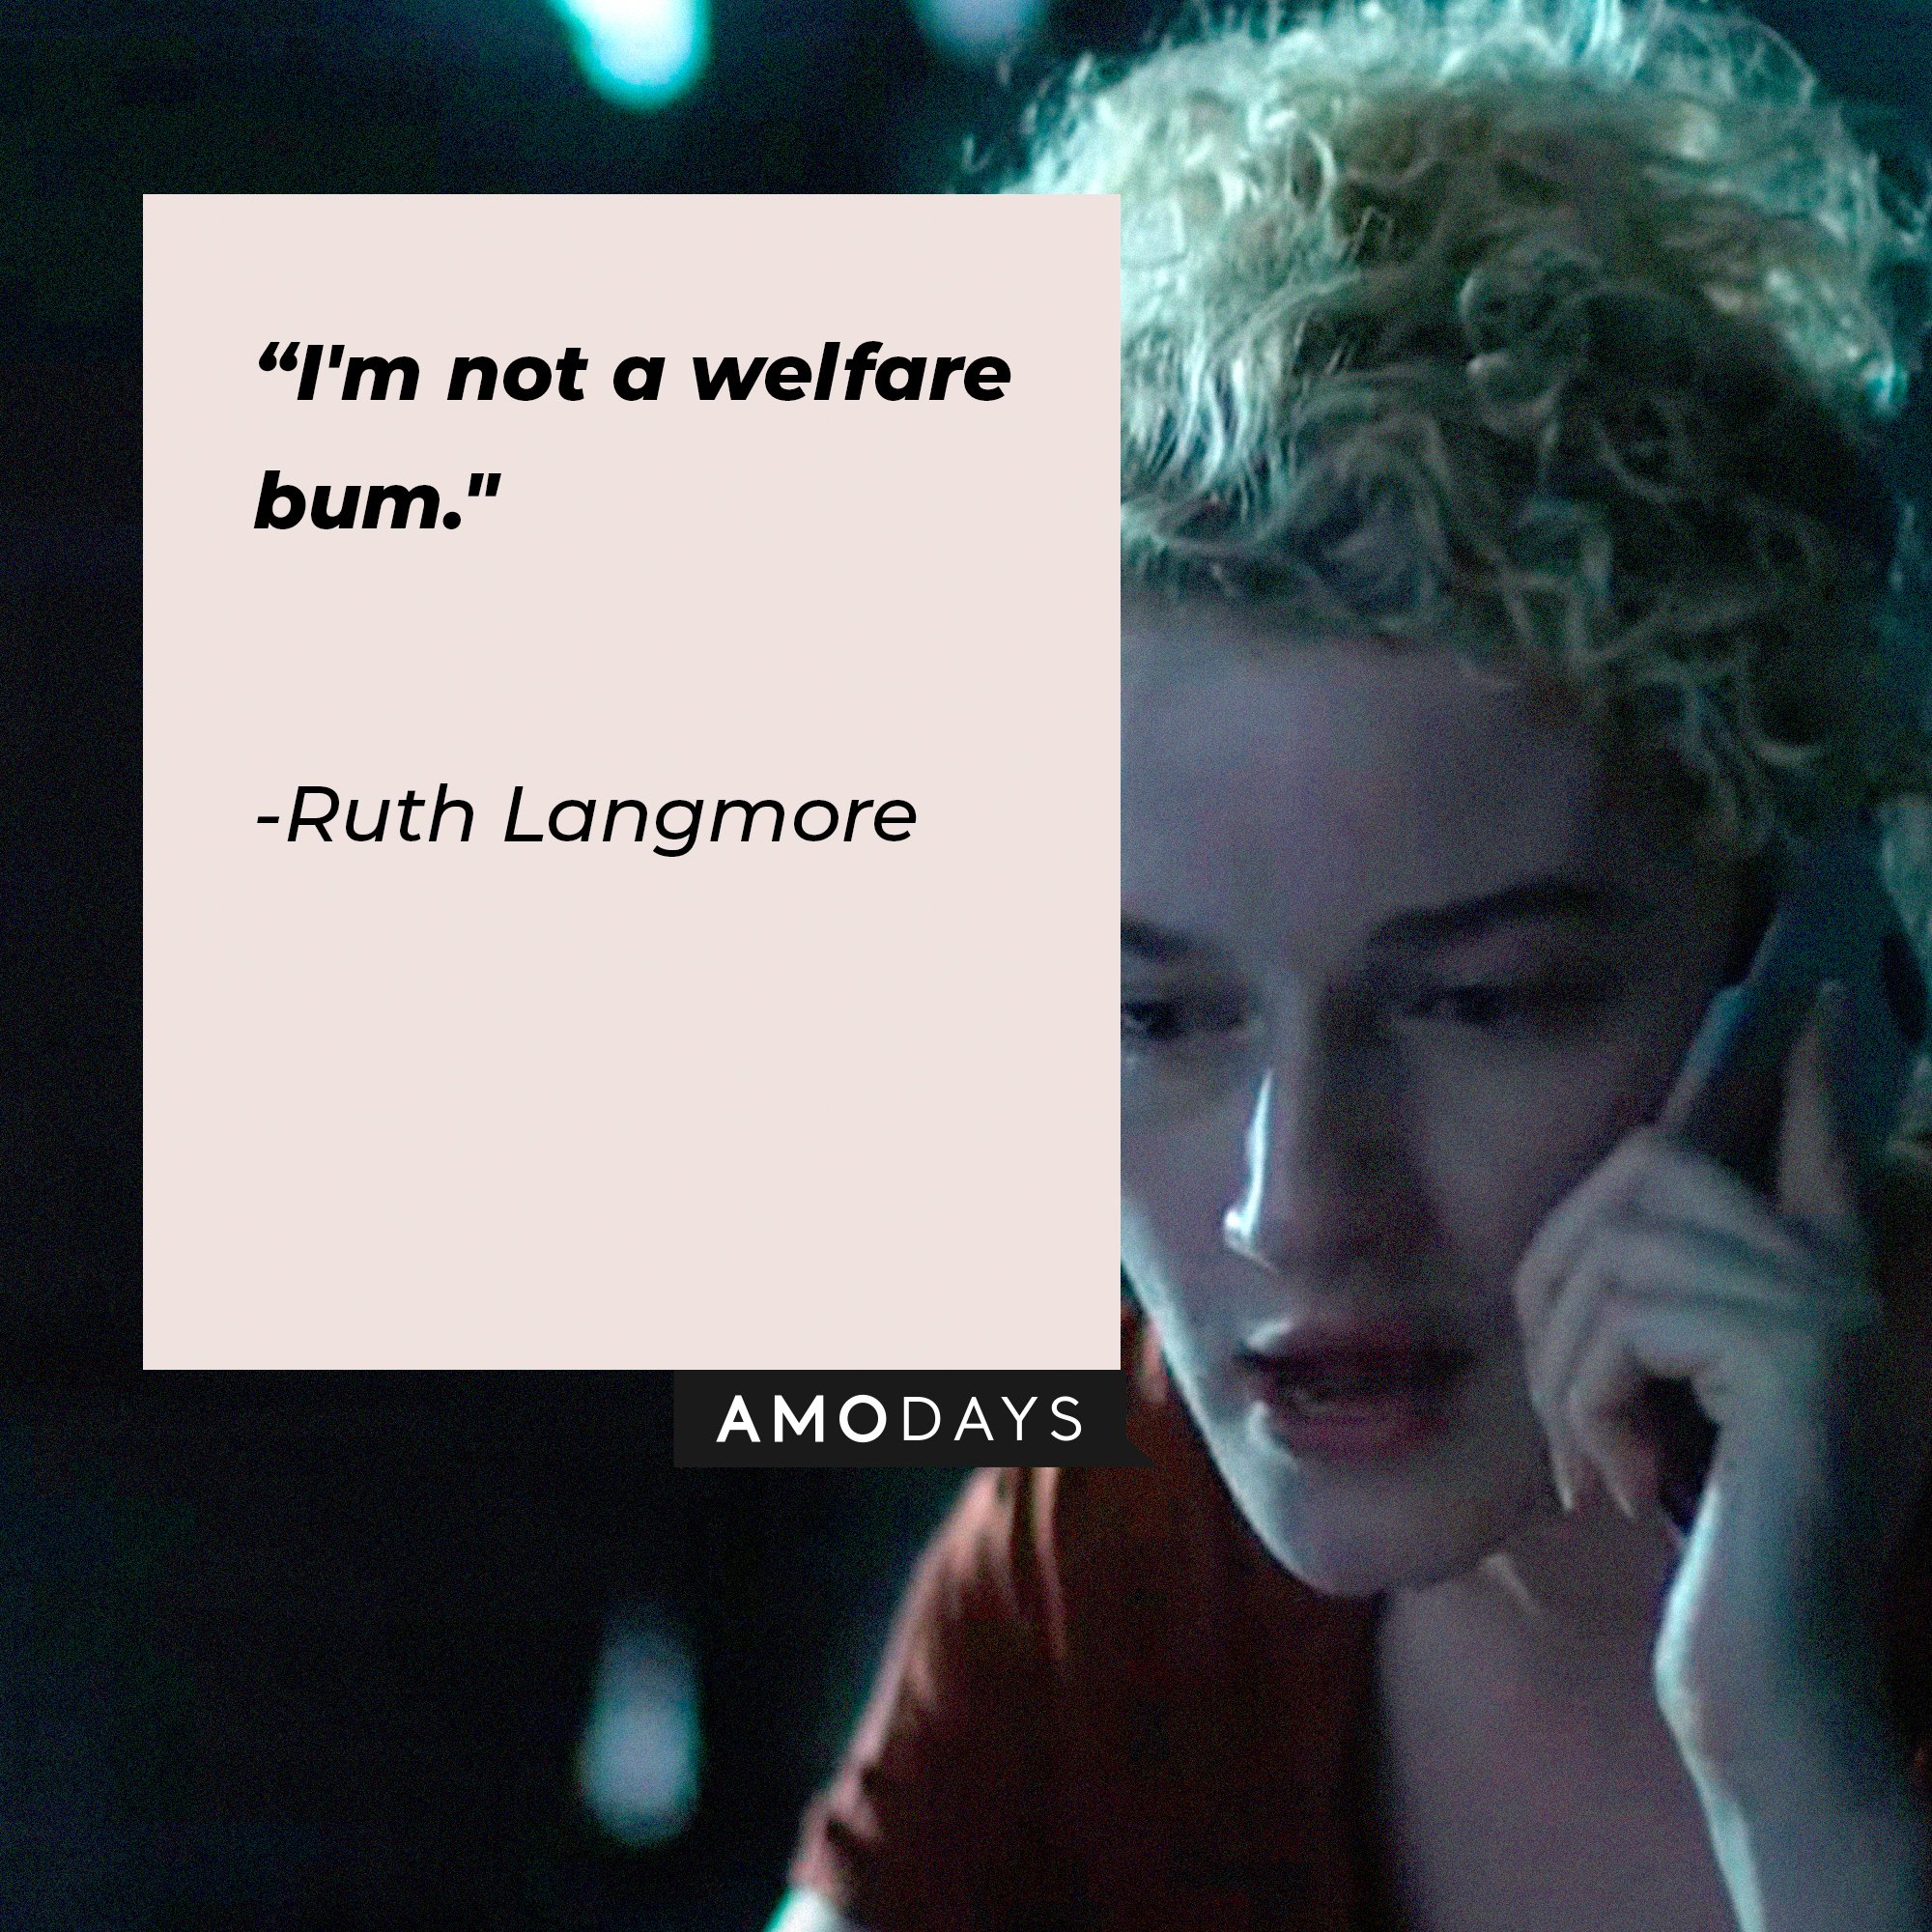 Ruth Langmore’s quote: “I'm not a welfare bum."  | Image: AmoDays